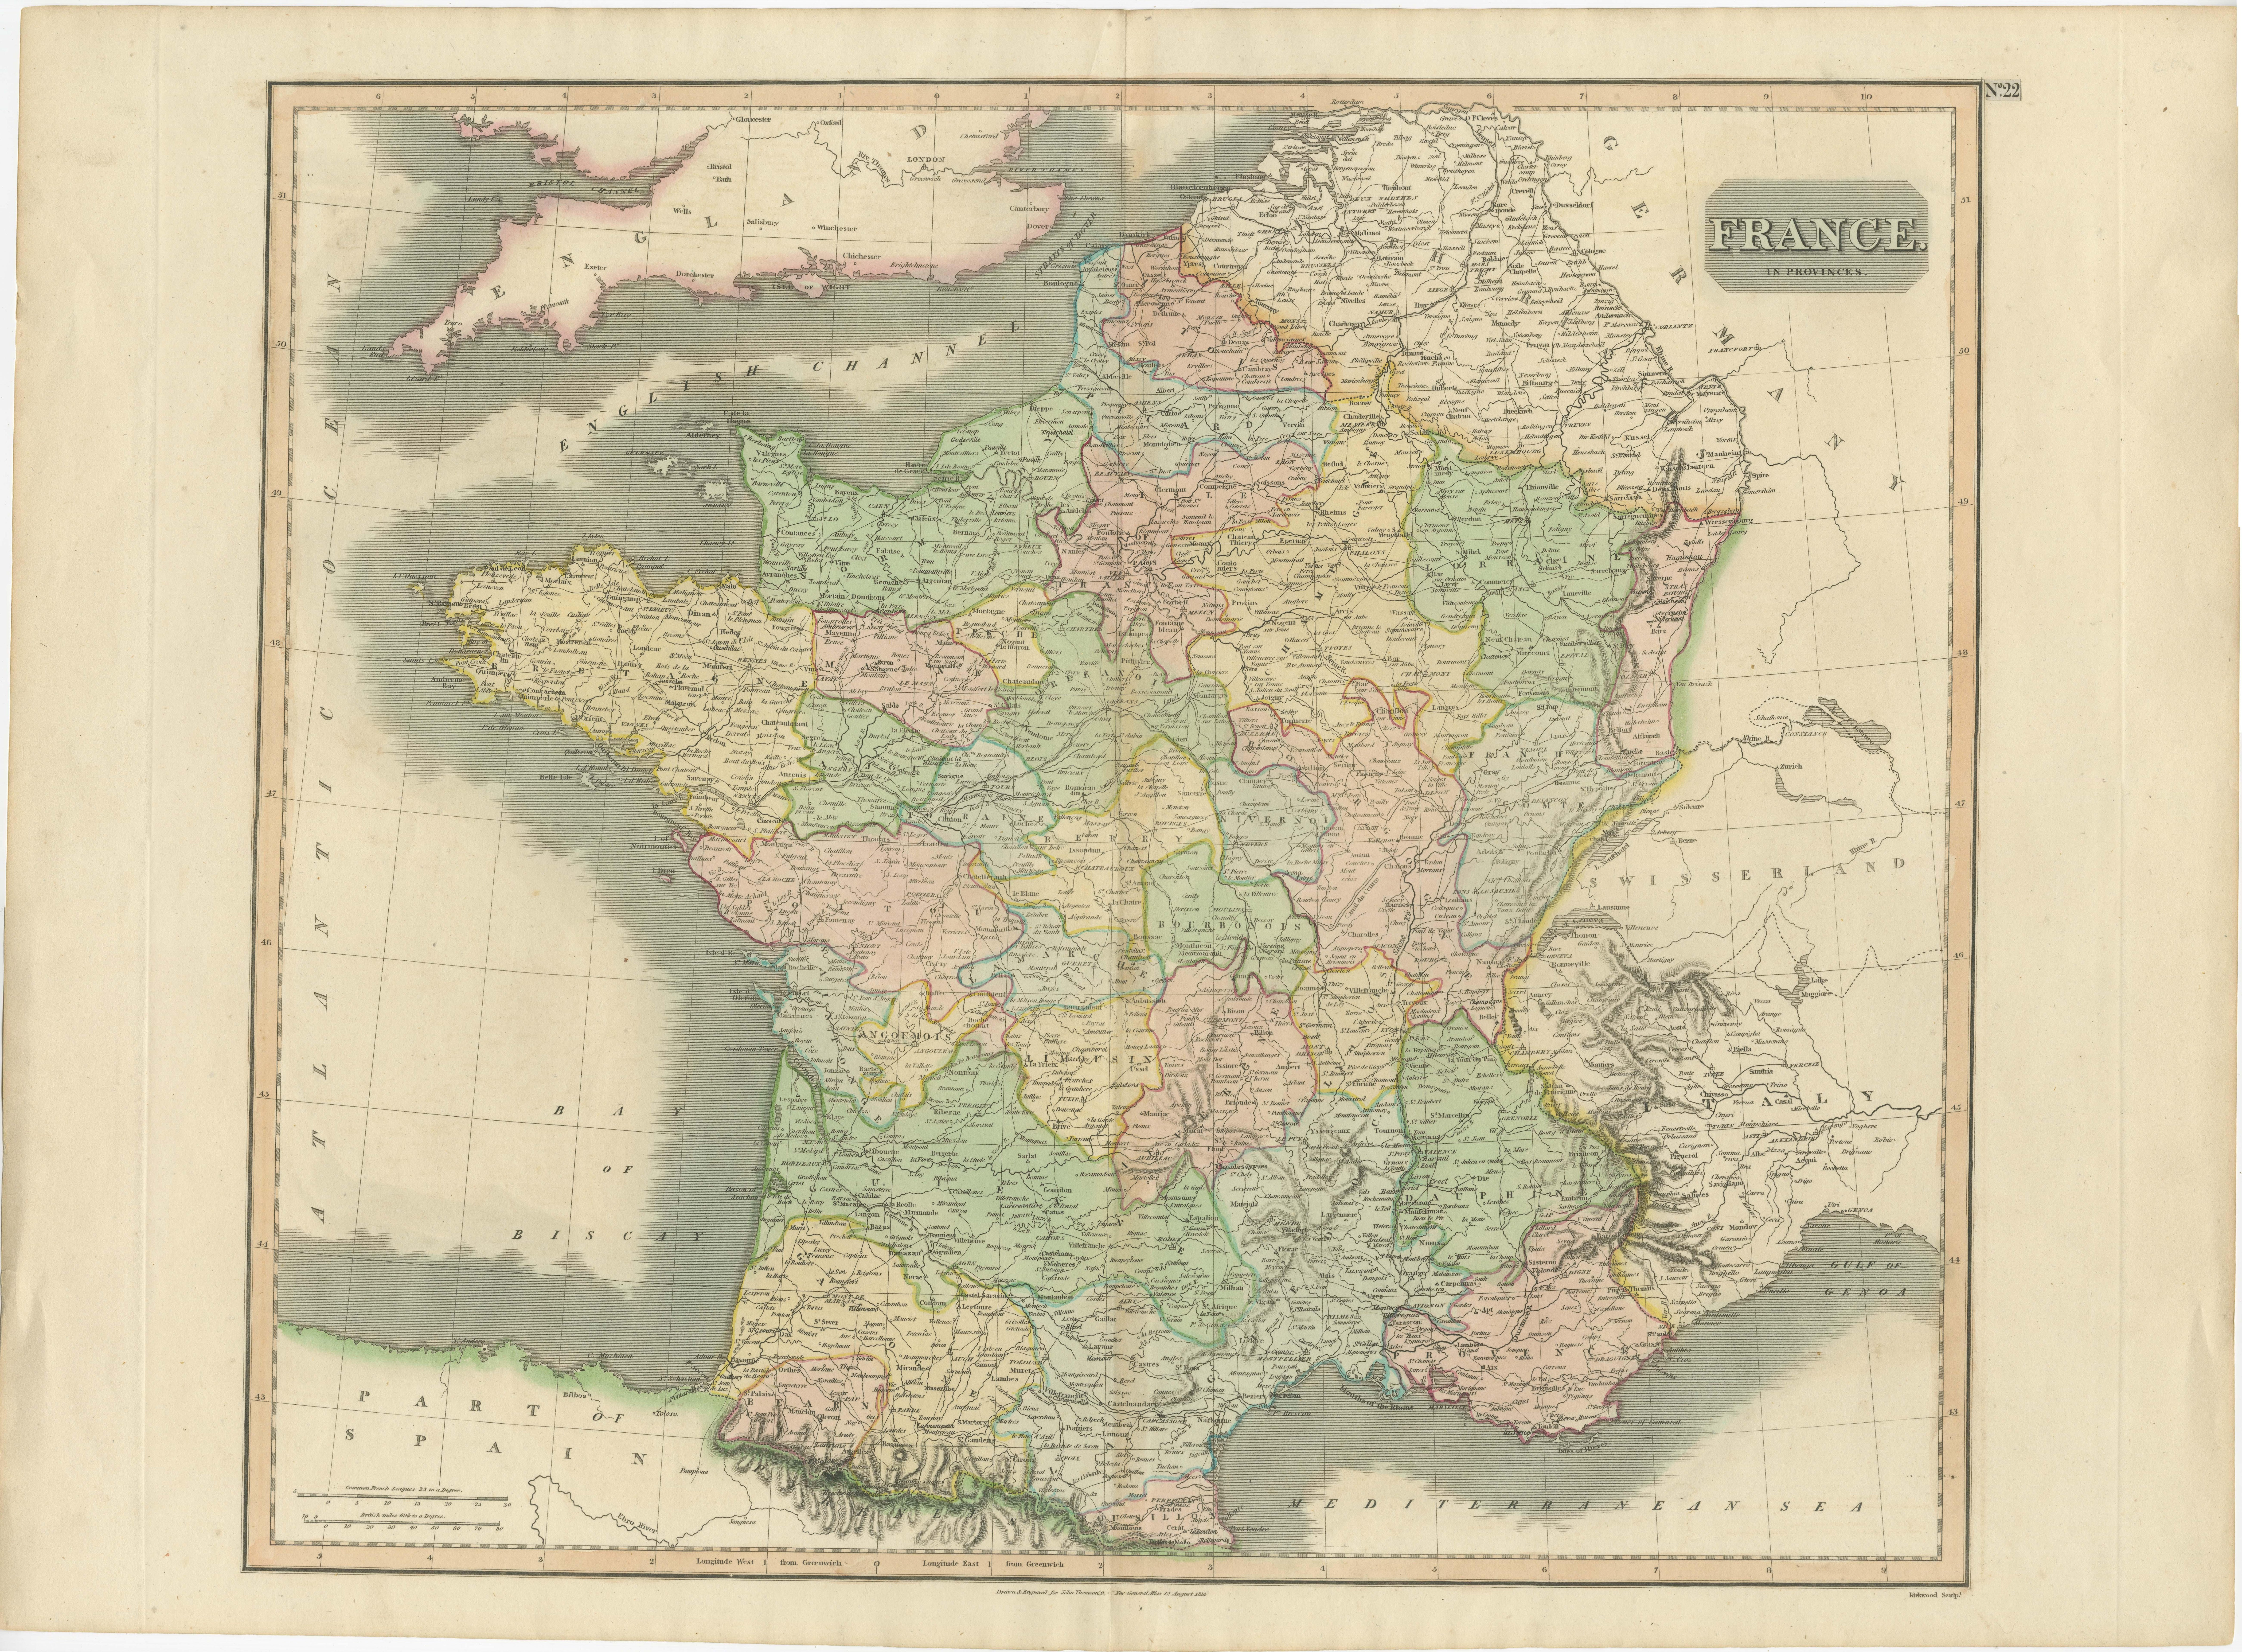 Antique map titled 'France in Provinces'. Beautiful antique map of France. Drawn and engraved for John Thomson's 'New General Atlas' published circa 1814.